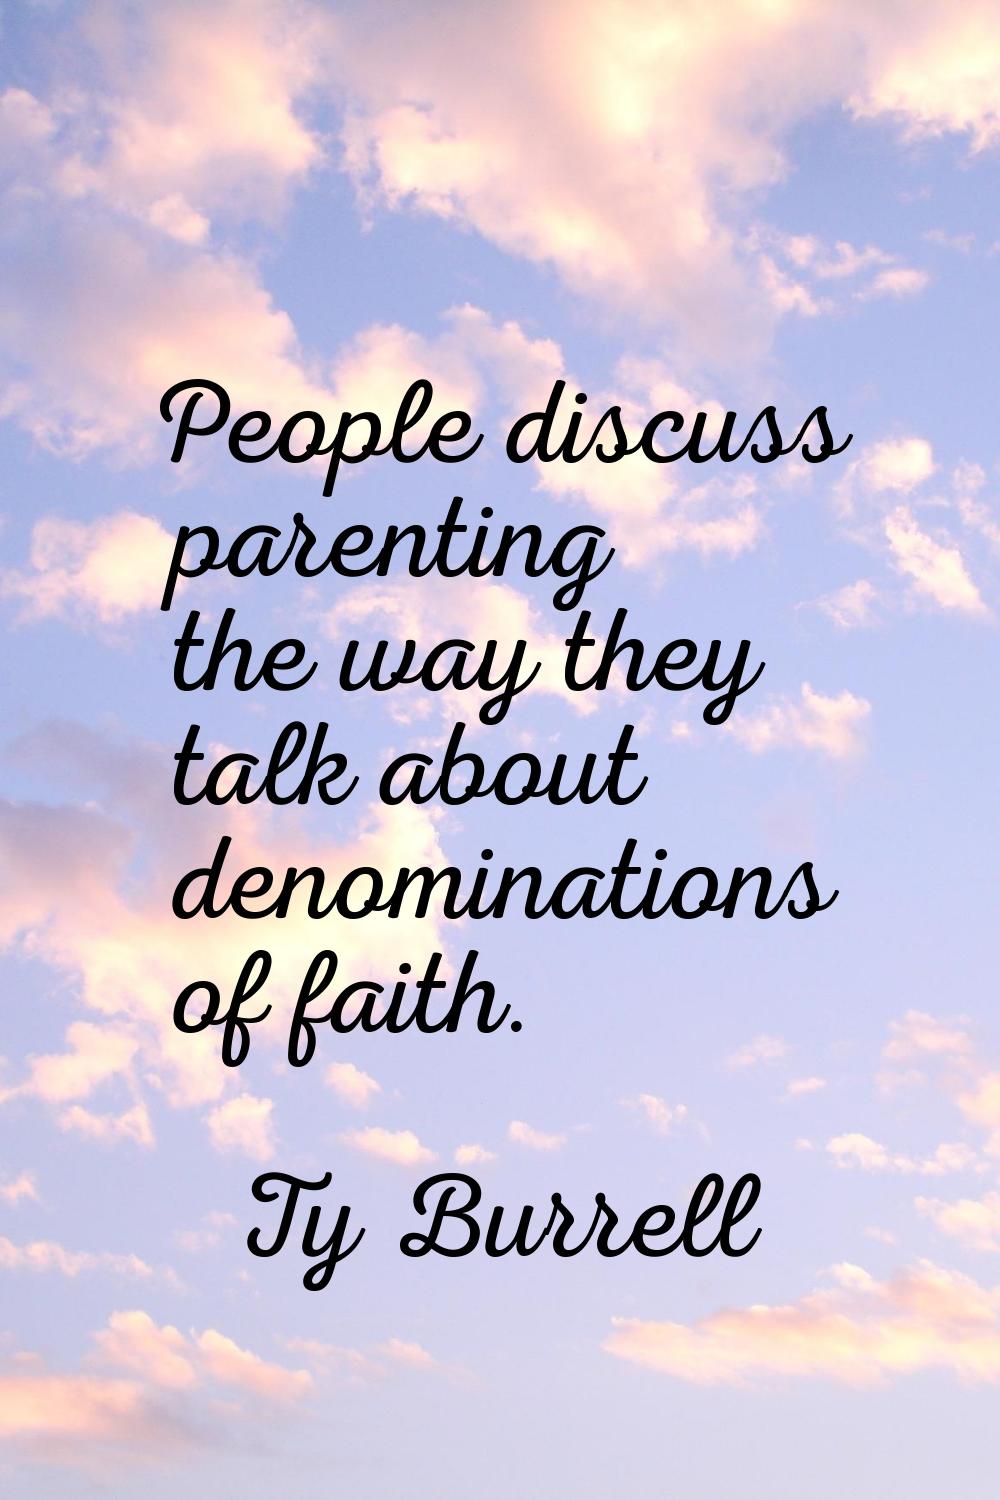 People discuss parenting the way they talk about denominations of faith.